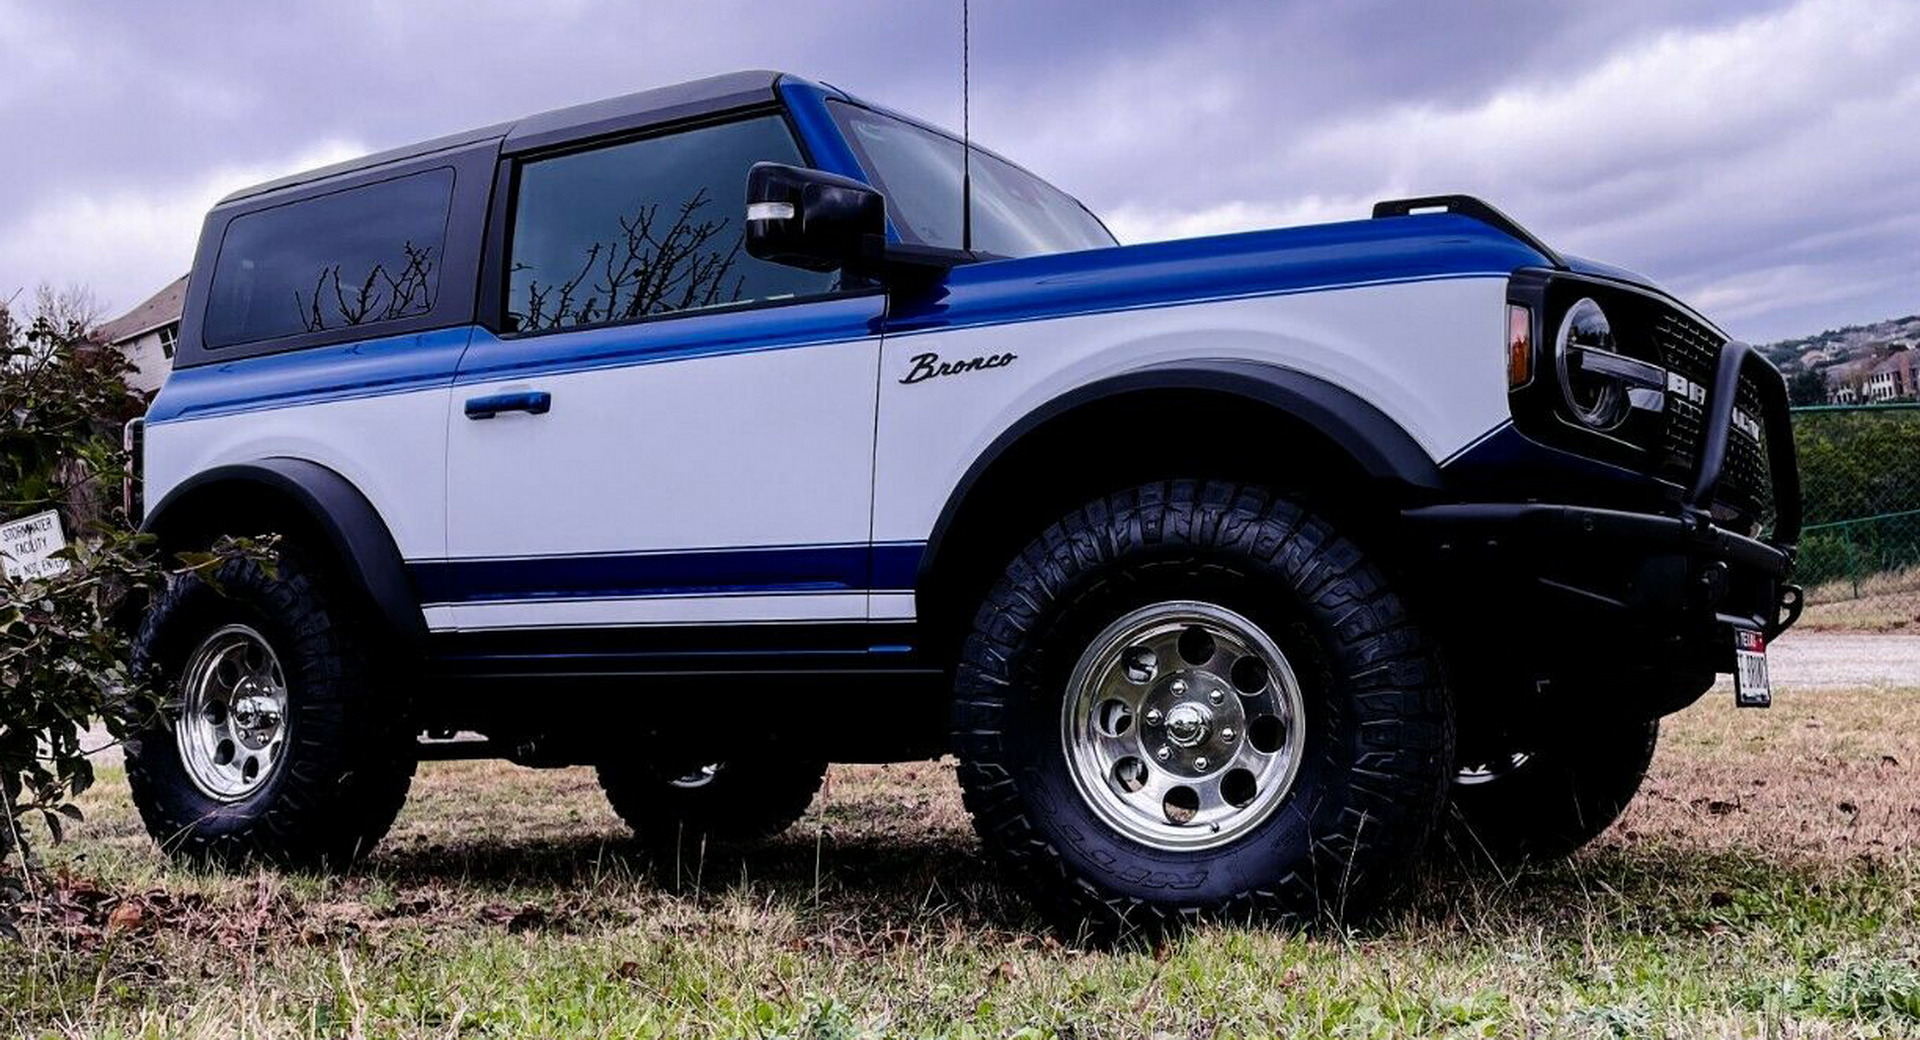 retro-inspired baby blue ford bronco with gloss white pops is now on sale